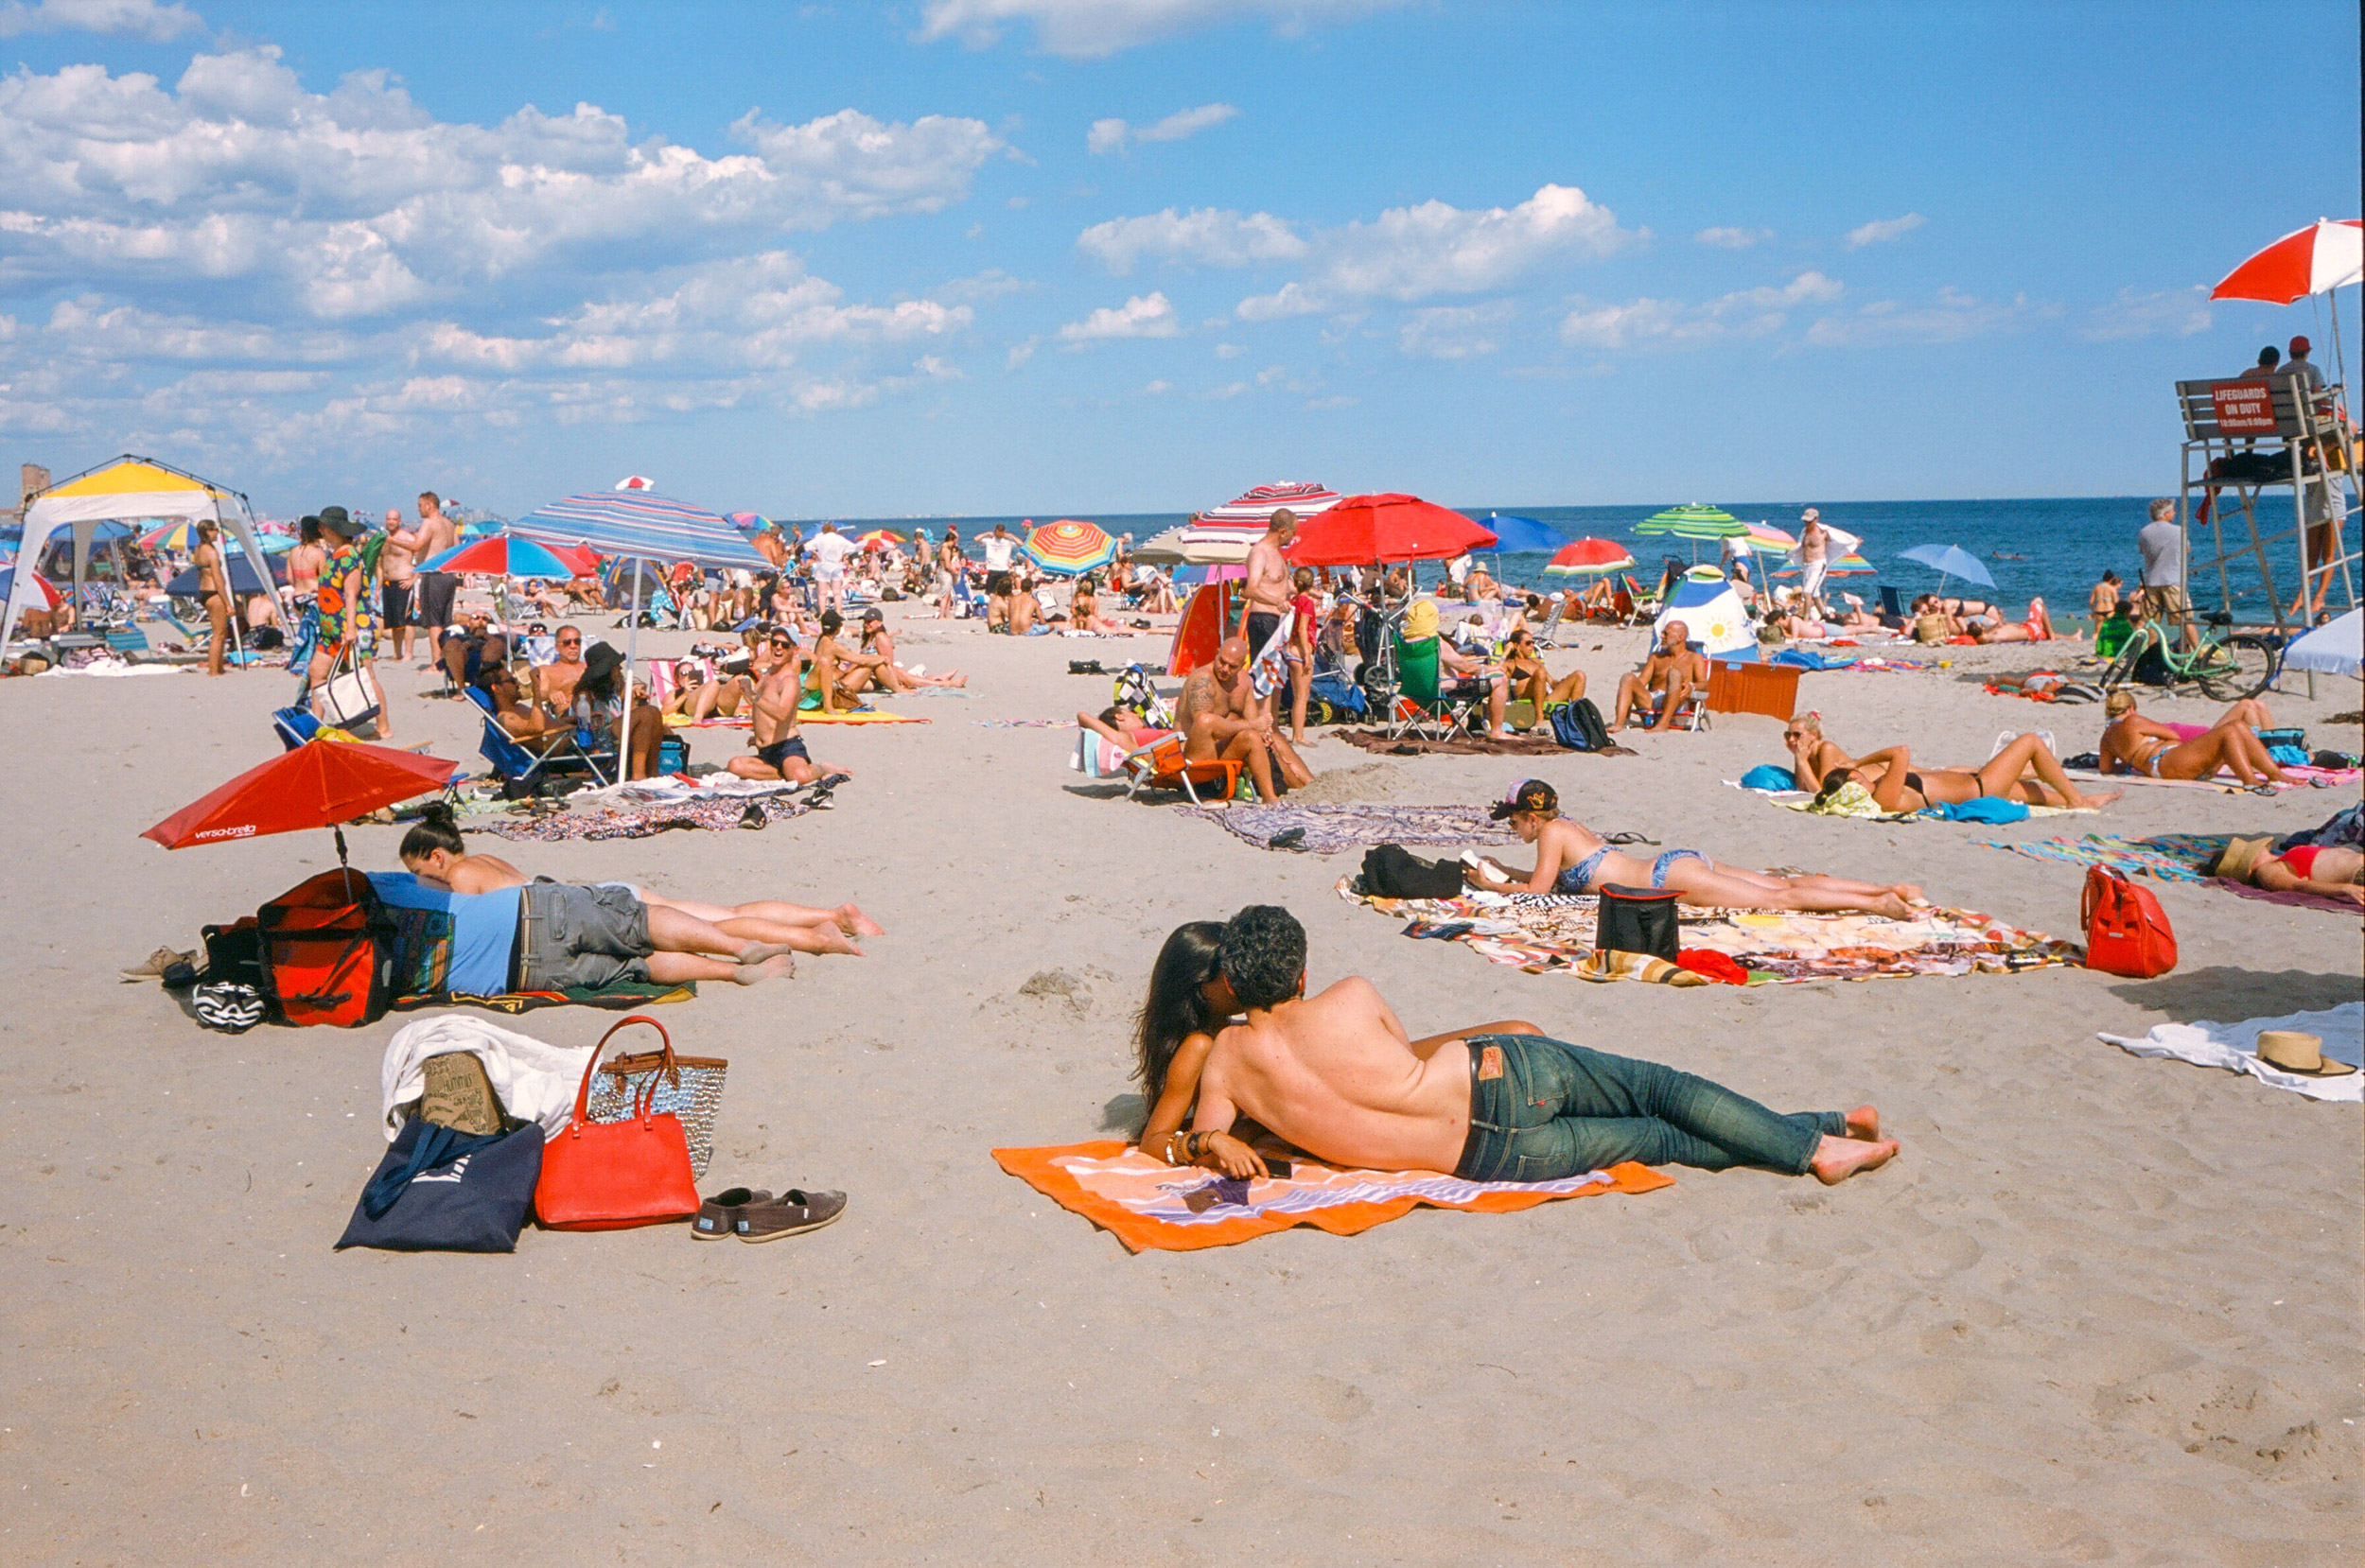 A-COLORFUL-AND-HOT-SUNNY-DAY-ON-THE-BEACH-OF-FAR-ROCKAWAY-IN-NEW-YORK-